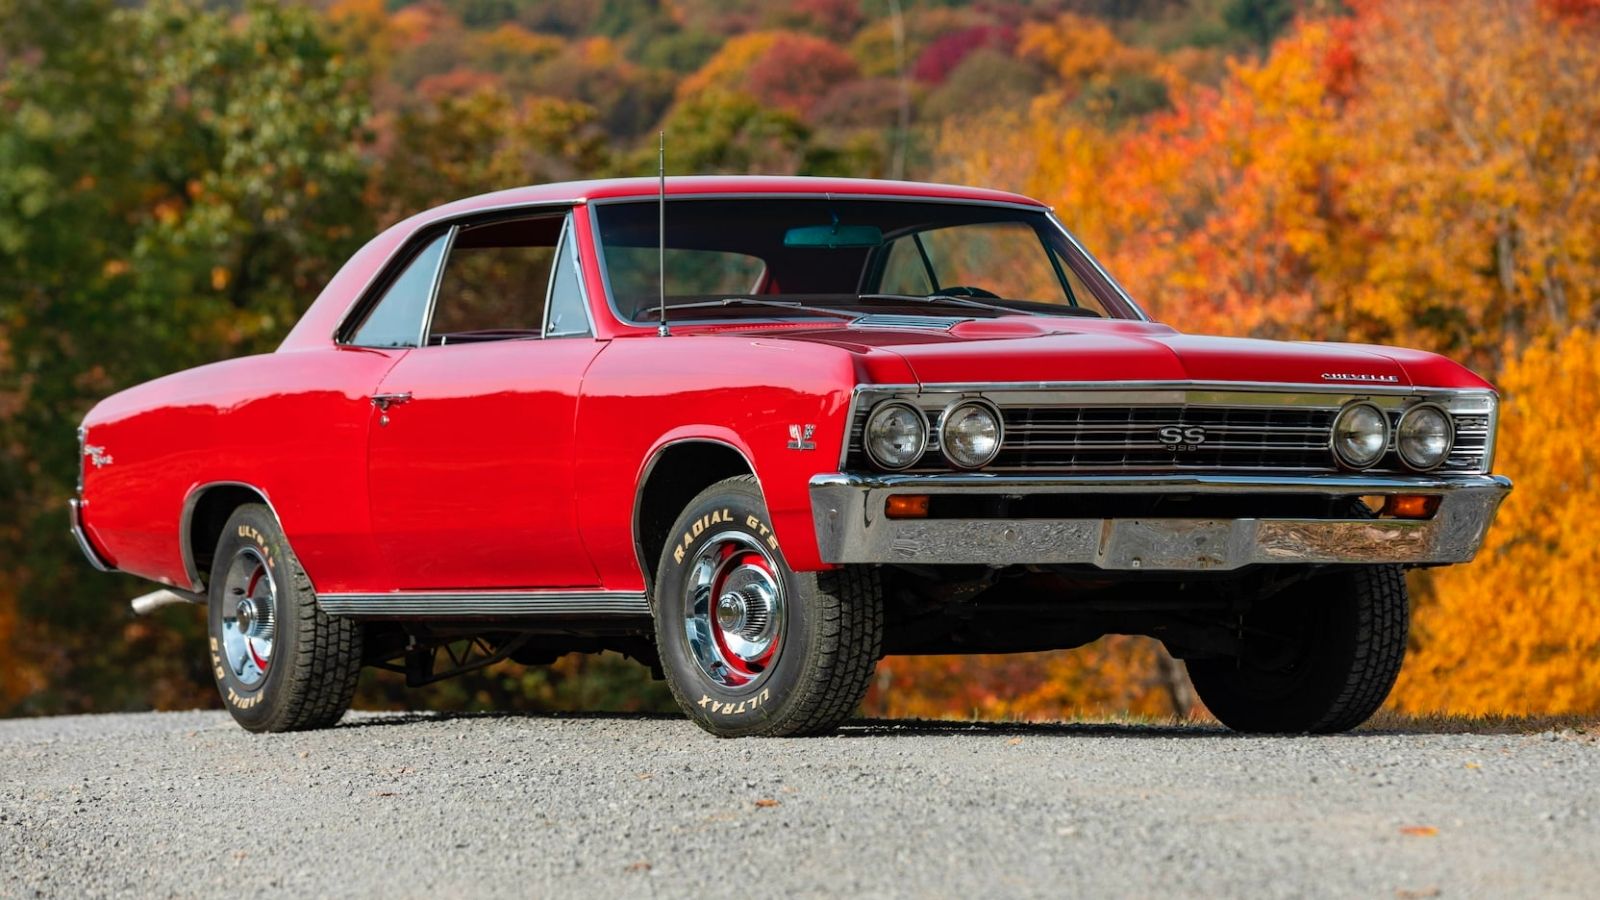 1967 chevy chevelle engine options and power compared